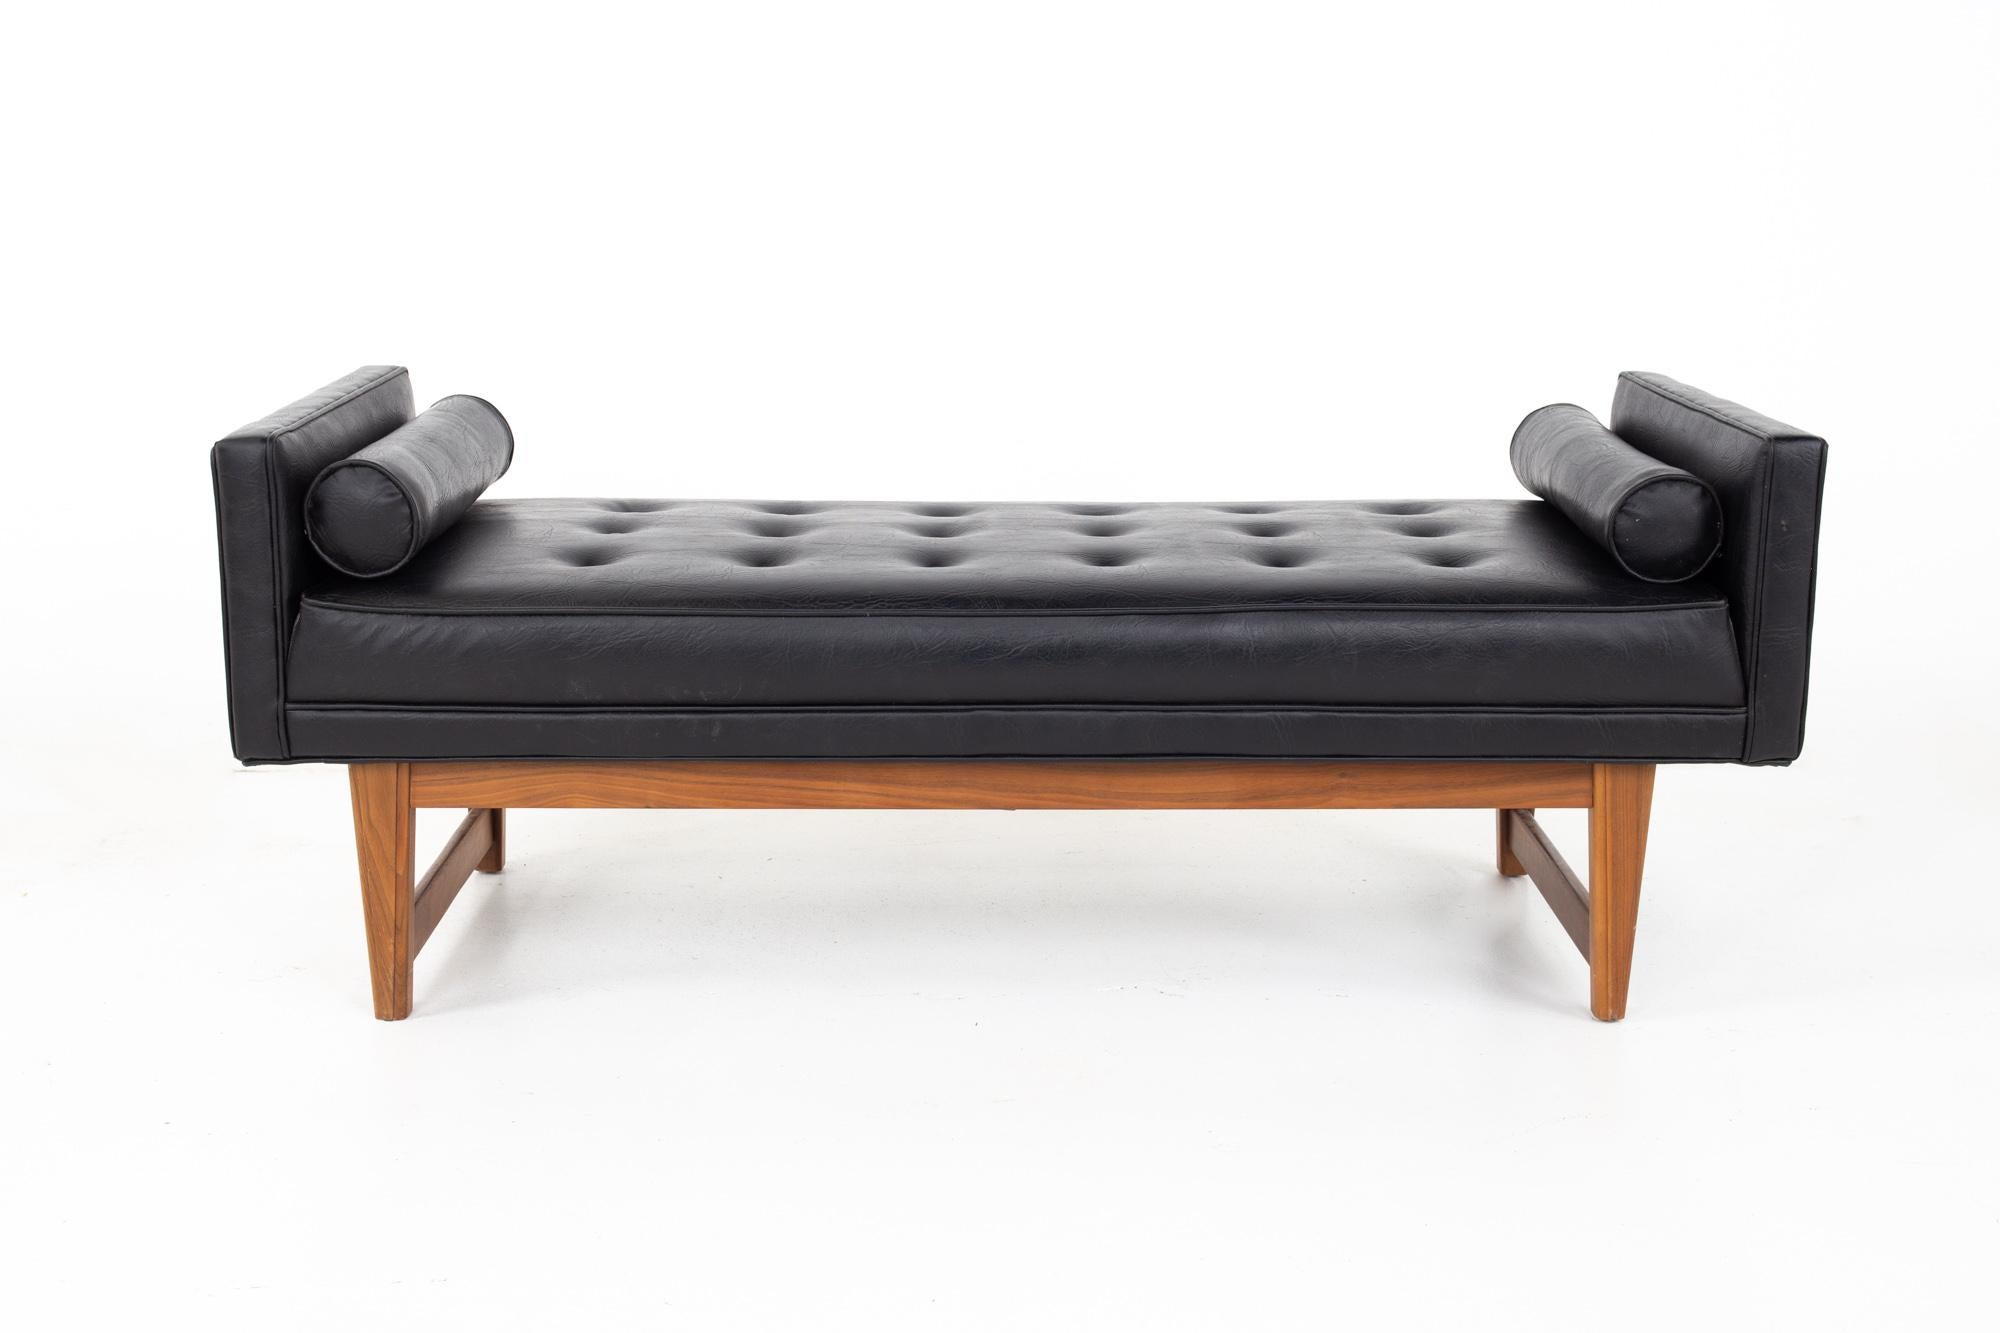 Lawrence Peabody for Selig mid century tufted black leather upholstered bench

Bench measures: 52.5 wide x 19.5 deep x 20.5 inches high

All pieces of furniture can be had in what we call restored vintage condition. That means the piece is